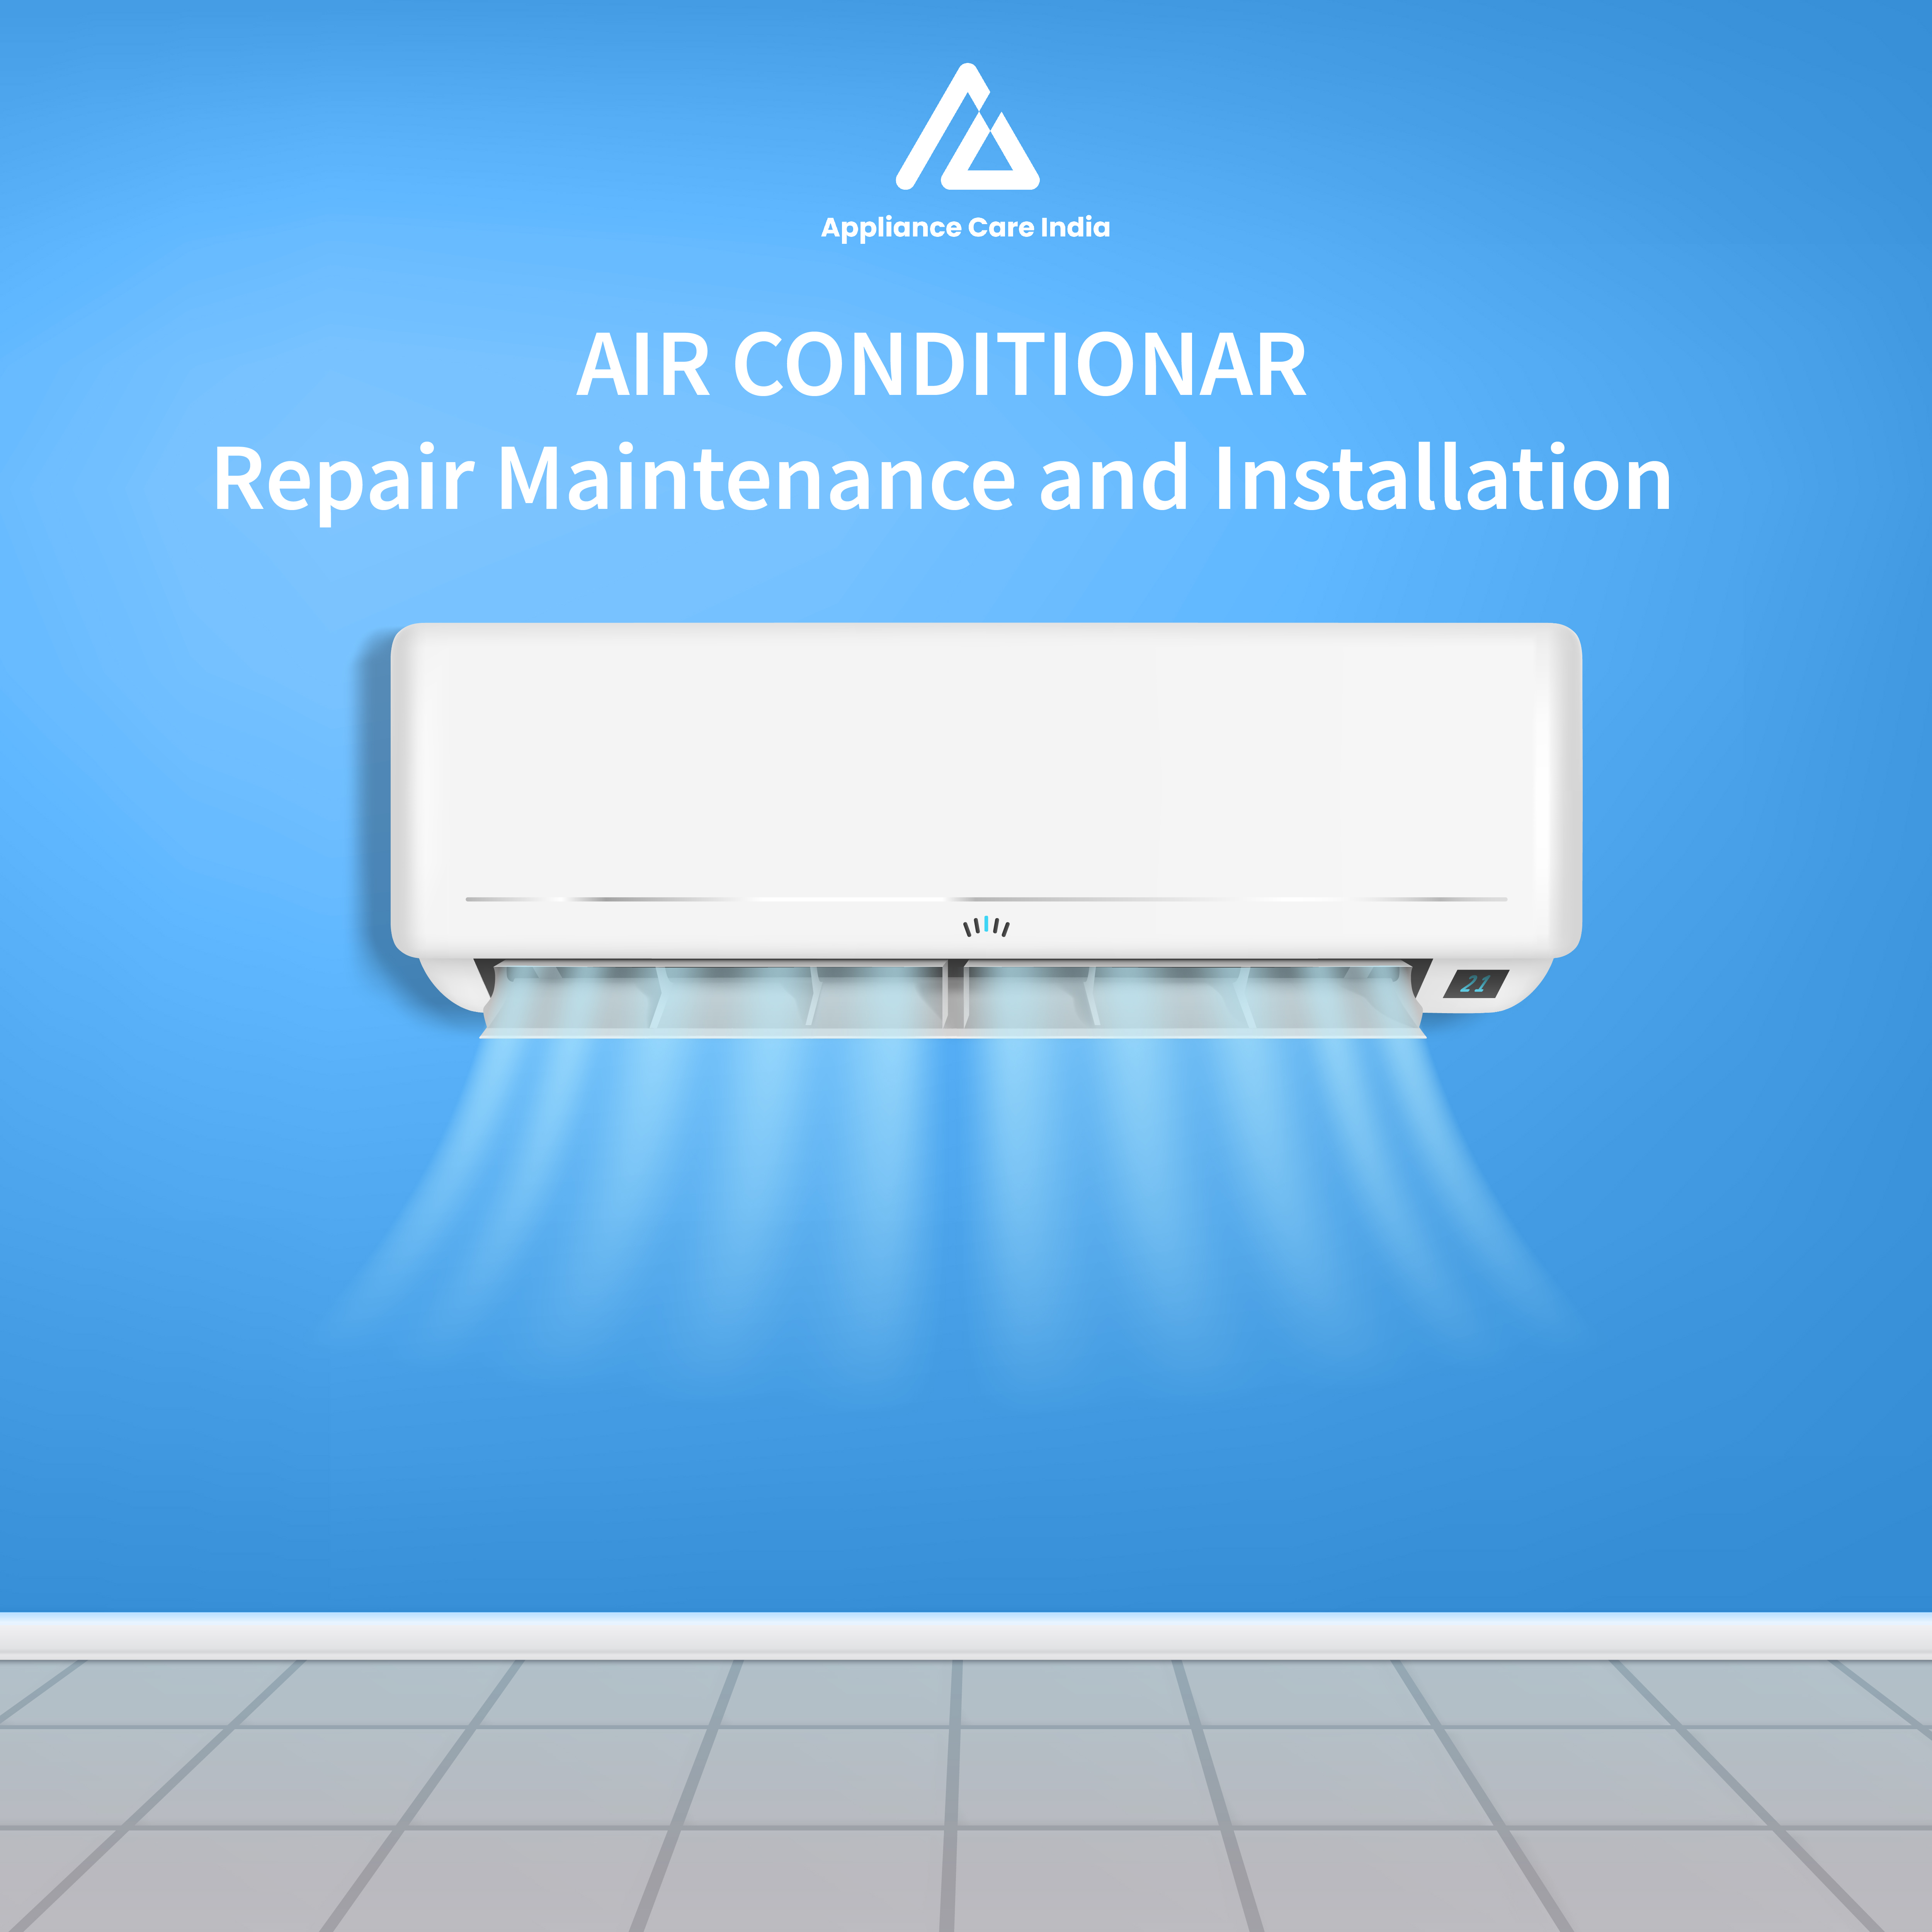 AC Repair from Appliance Care India